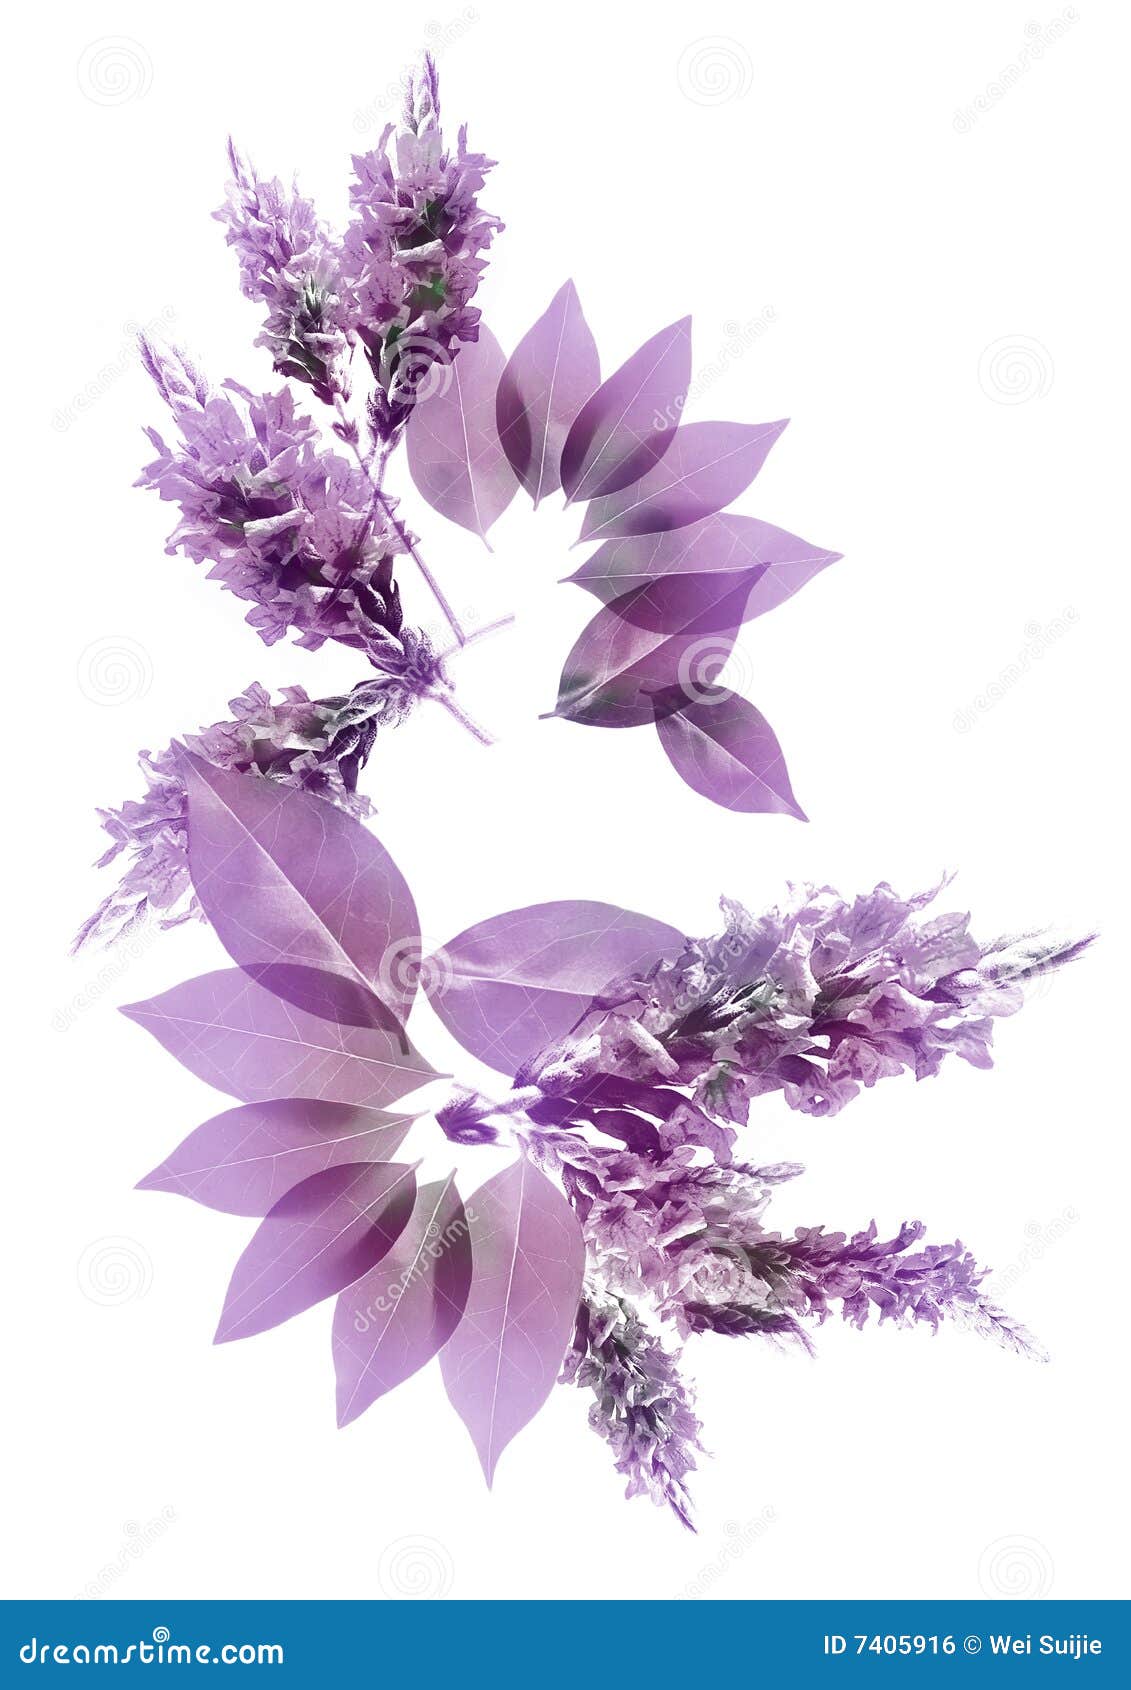 Download X-ray Flower Royalty Free Stock Image - Image: 7405916